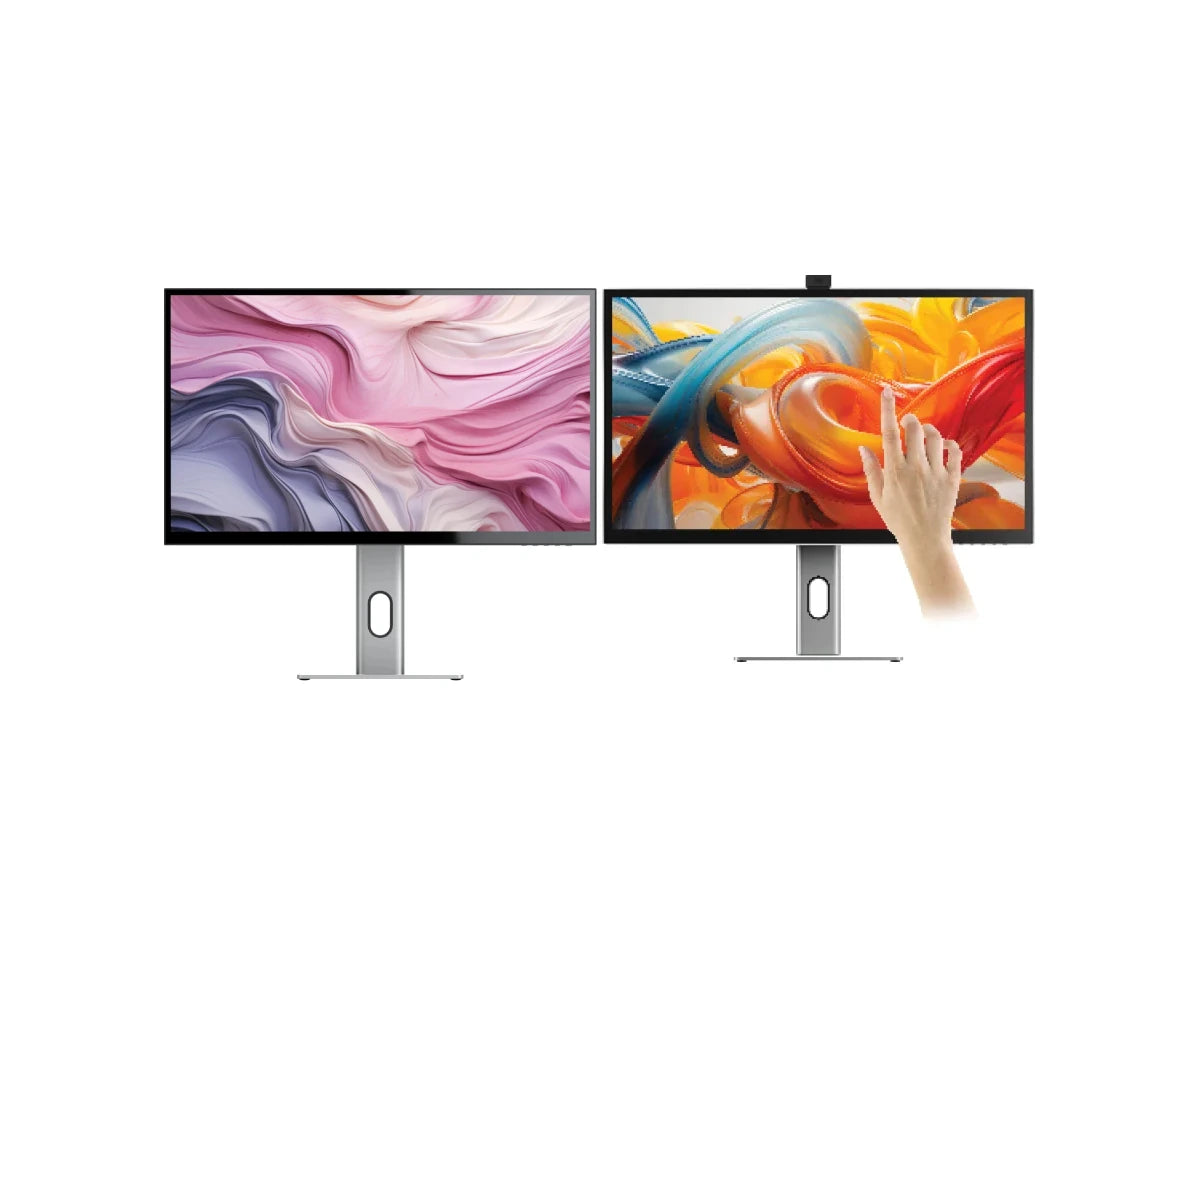 CLARITY 27" UHD 4K Monitor + Clarity Pro Touch 27" UHD 4K Monitor with 65W PD, Webcam and Touchscreen